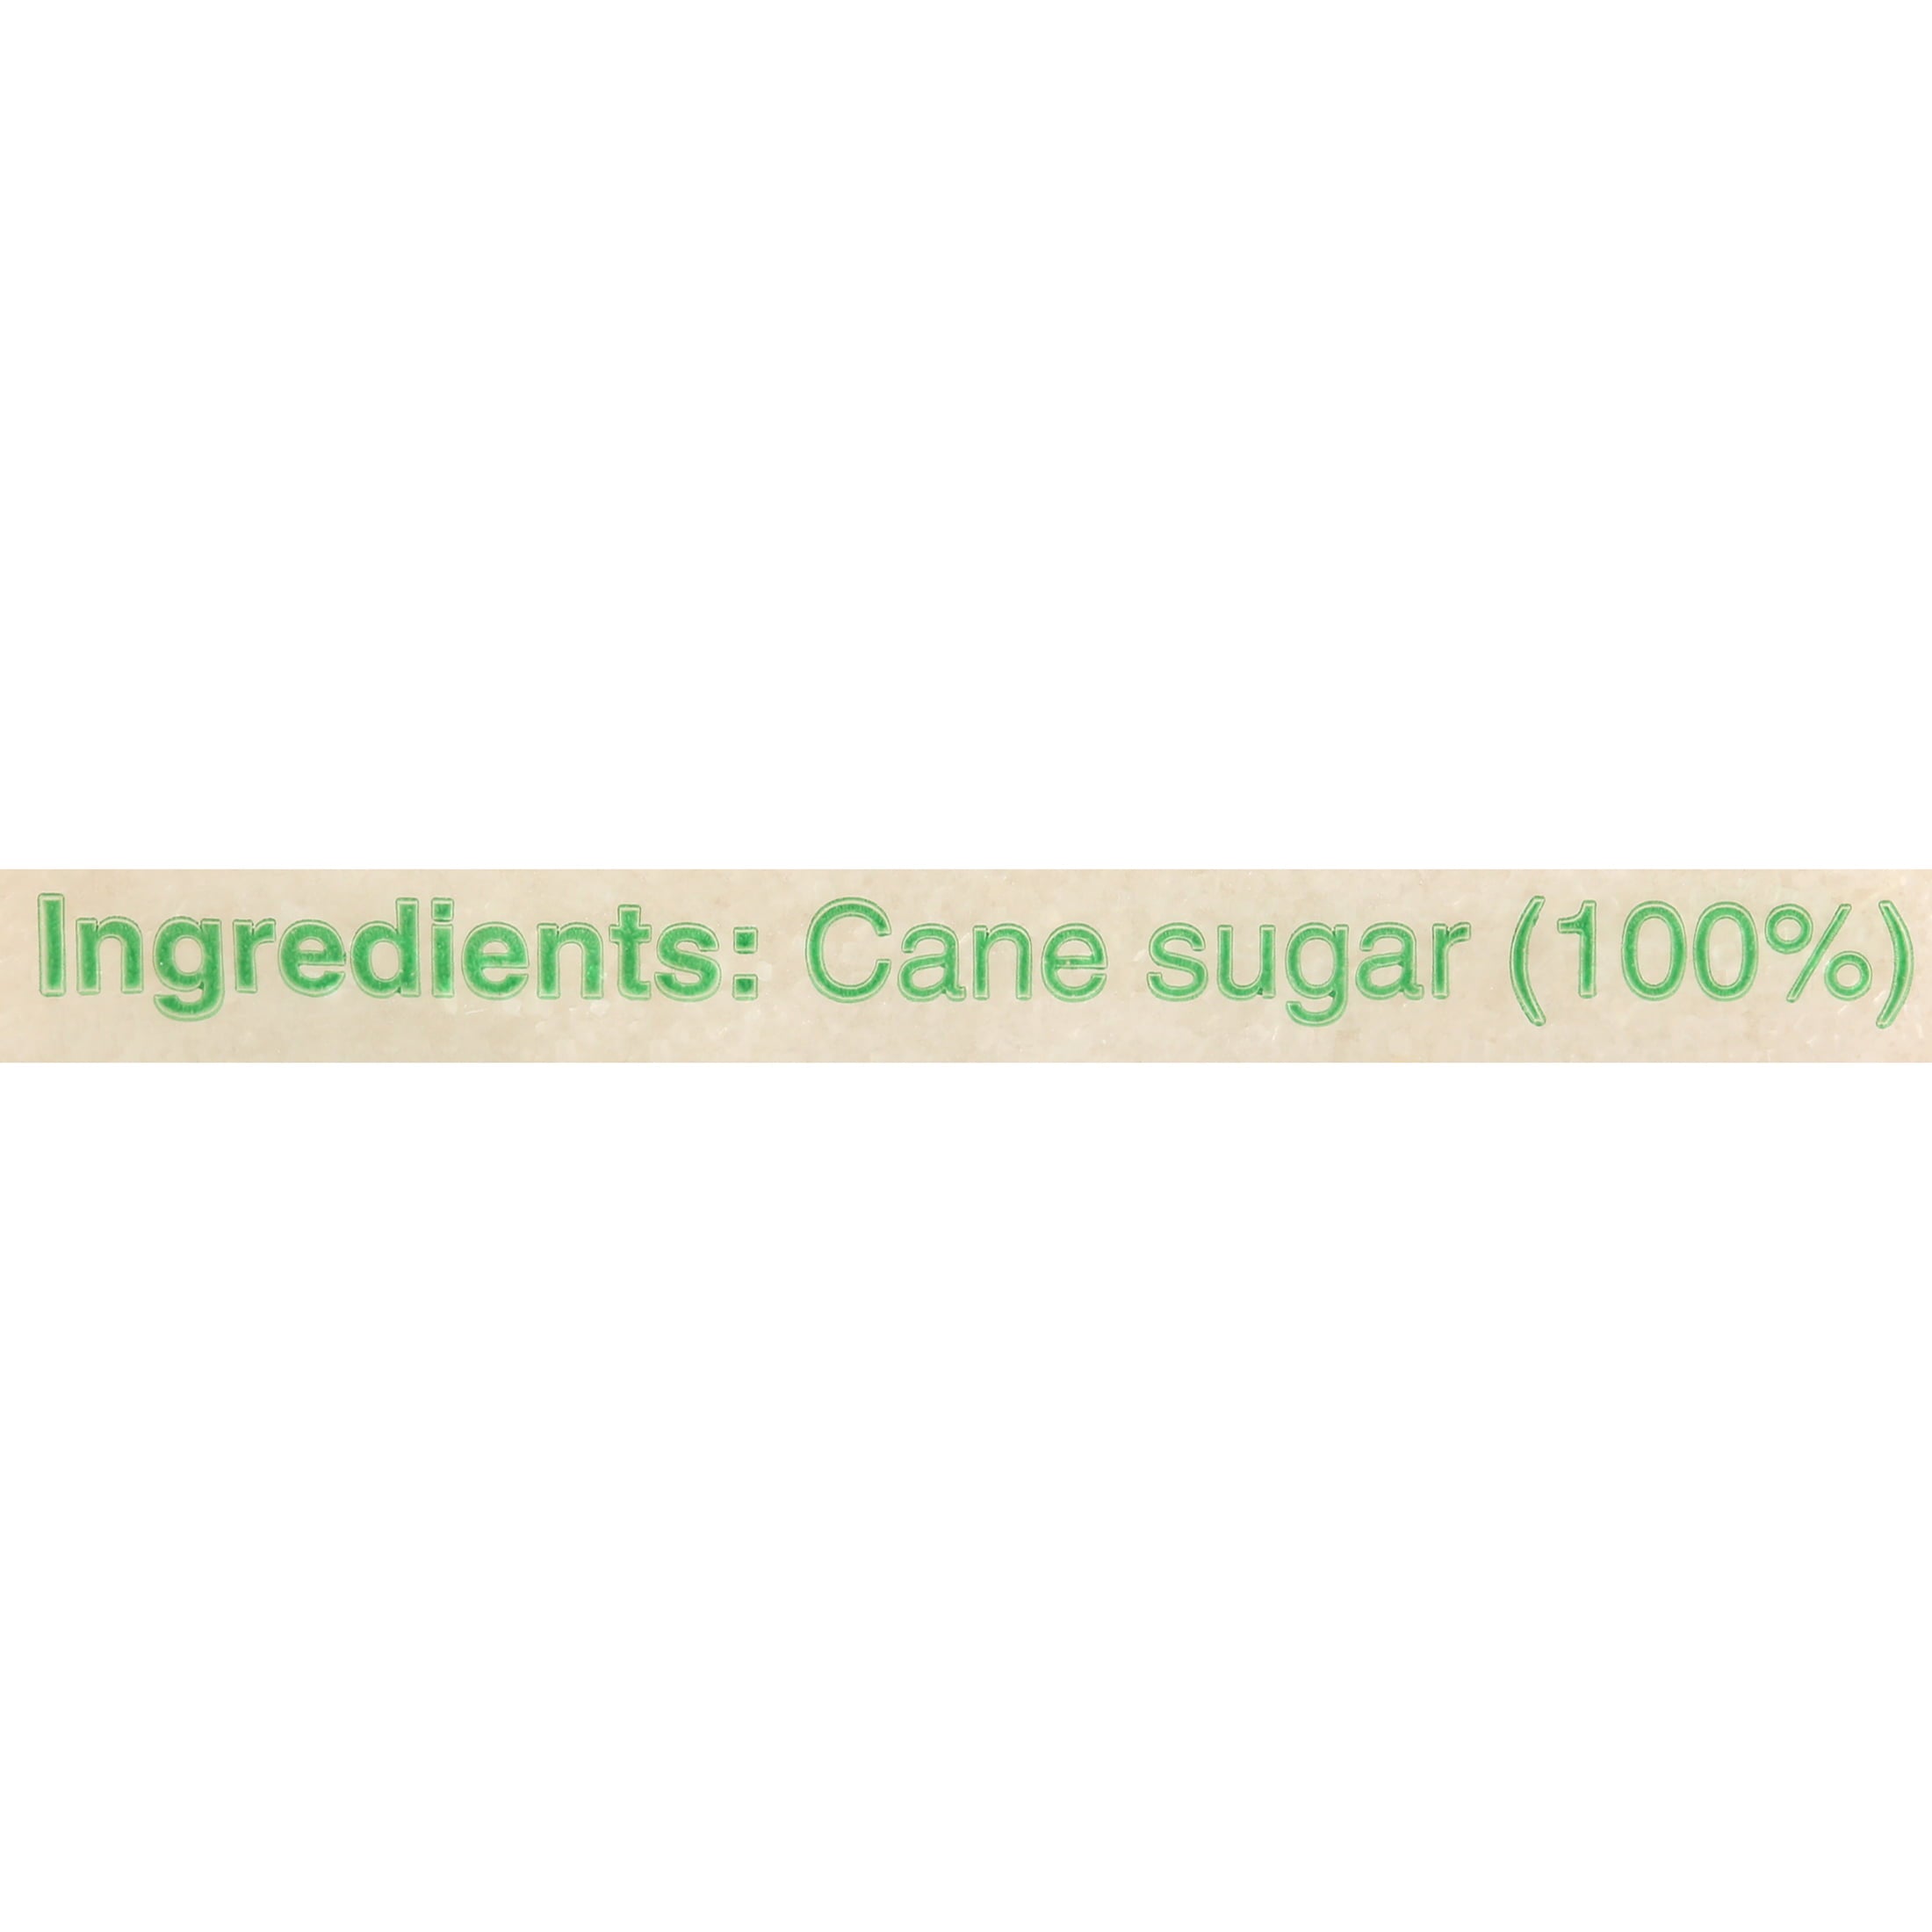 Zulka Pure Cane Sugar Allergen not Contained, 8 lb